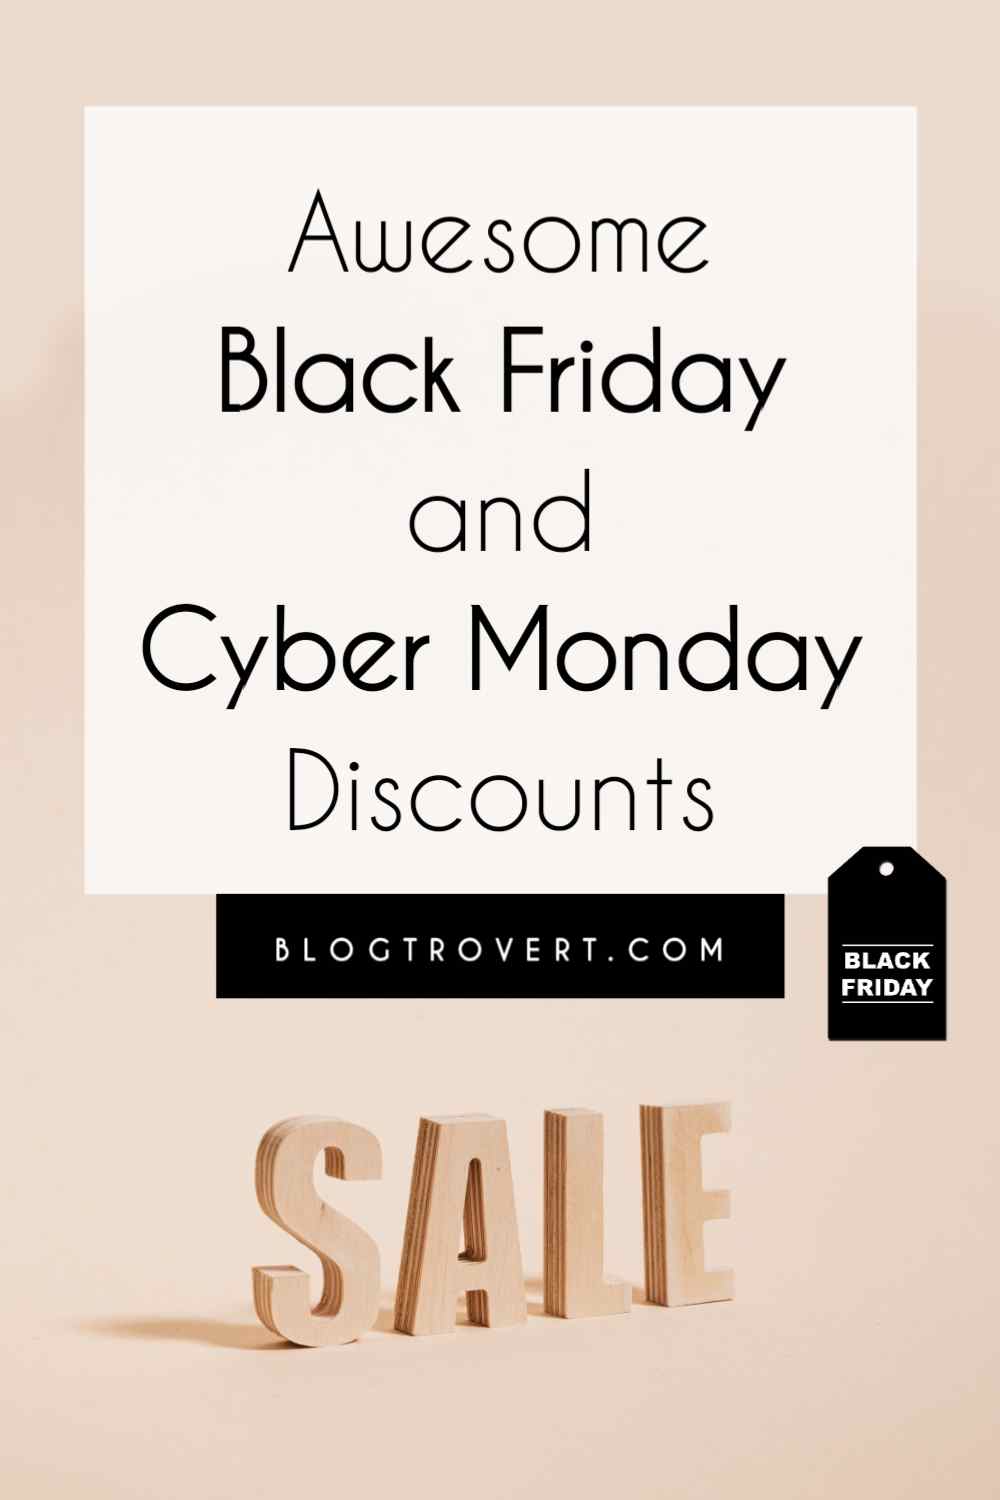 Awesome Black Friday and Cyber Monday Deals For Bloggers and Creatives 2